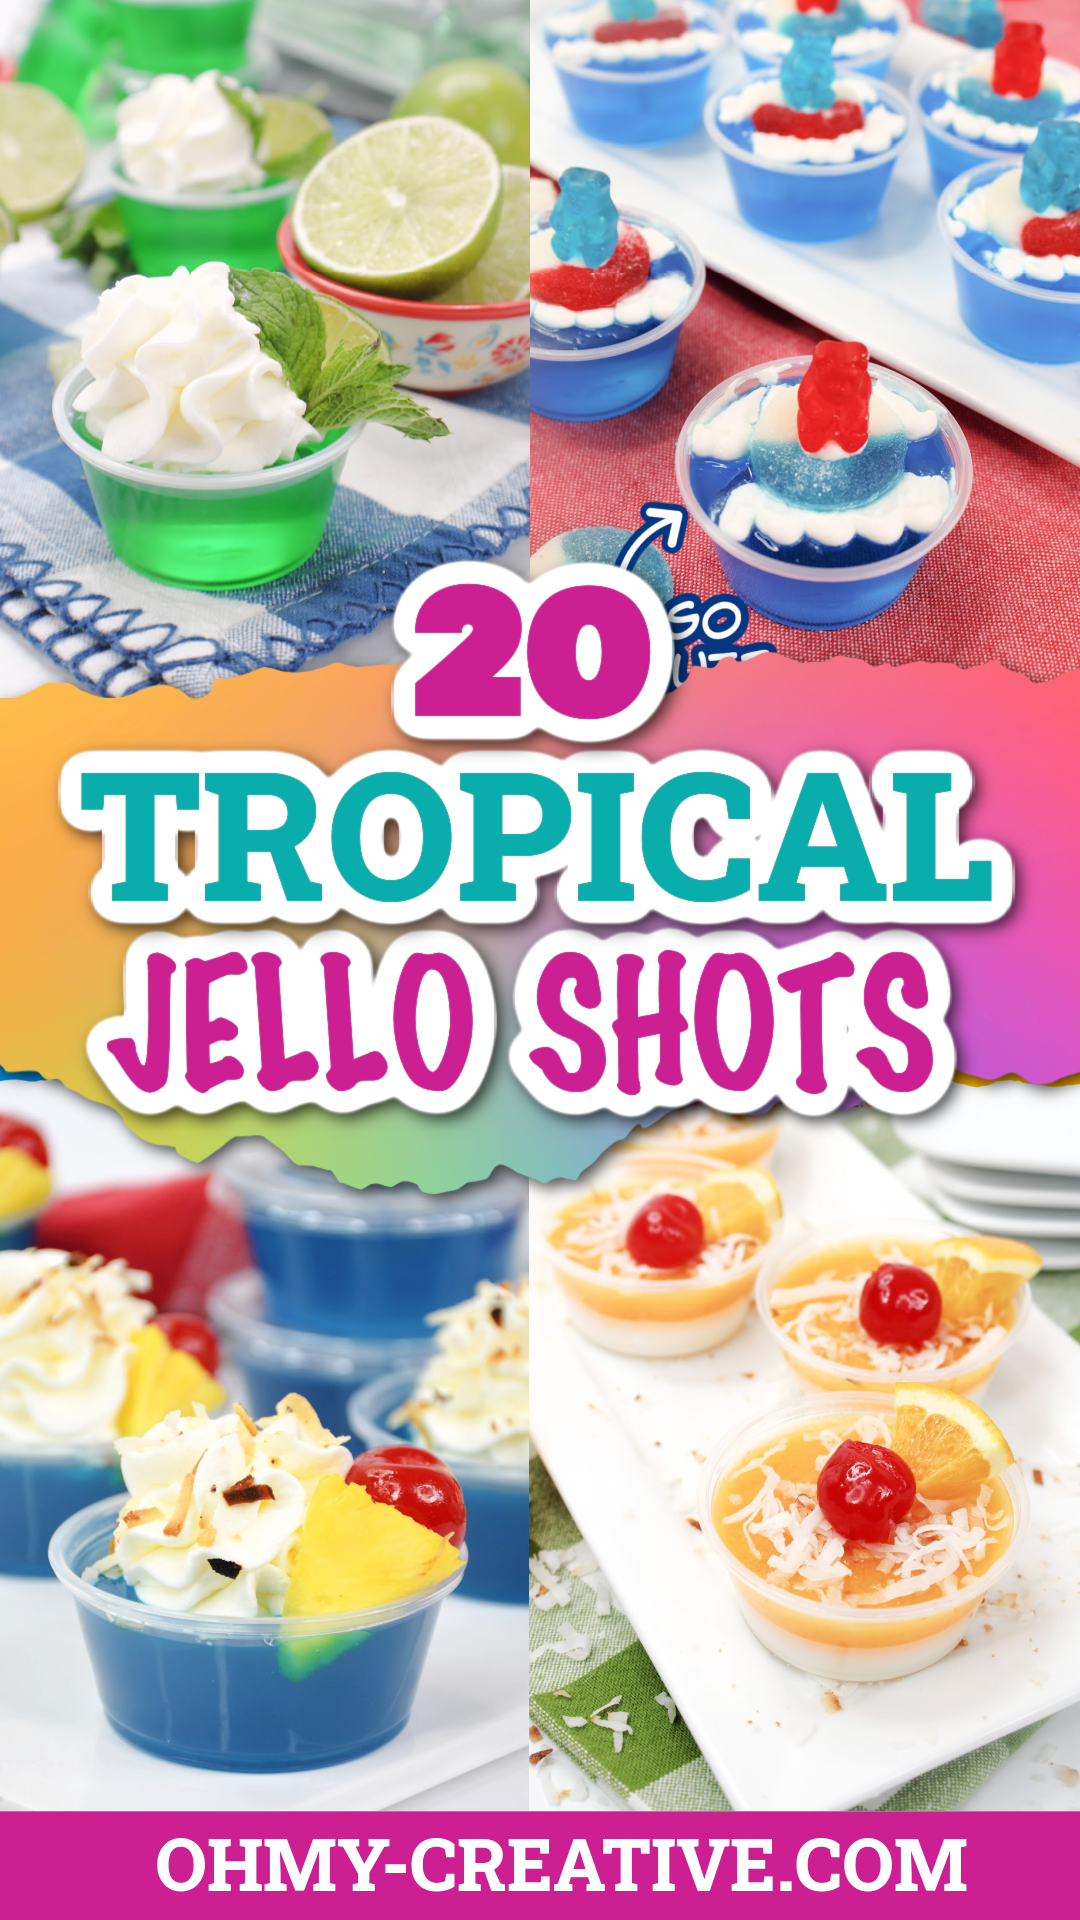 A collage of tropical jello shots.